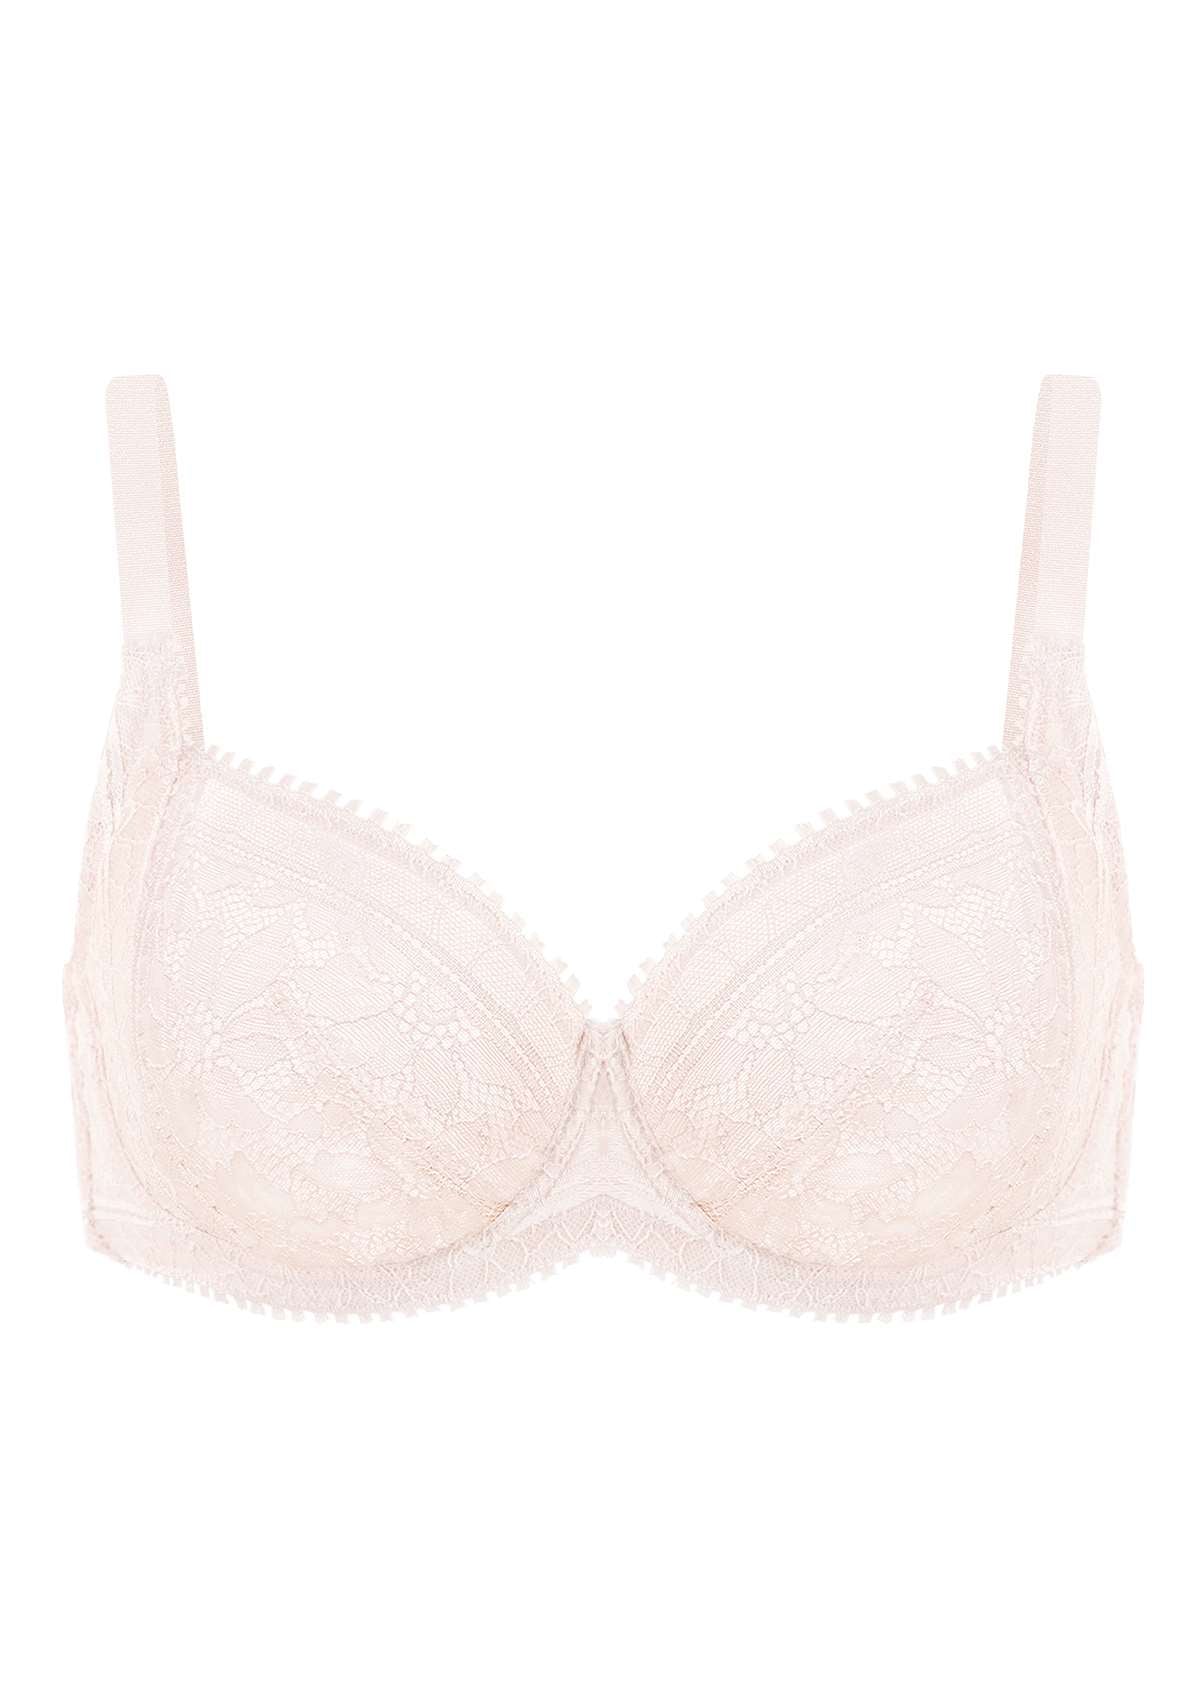 HSIA Silene Floral Delicate Unlined Lace Soft Cup Uplift Bra - Champagne / 40 / DDD/F